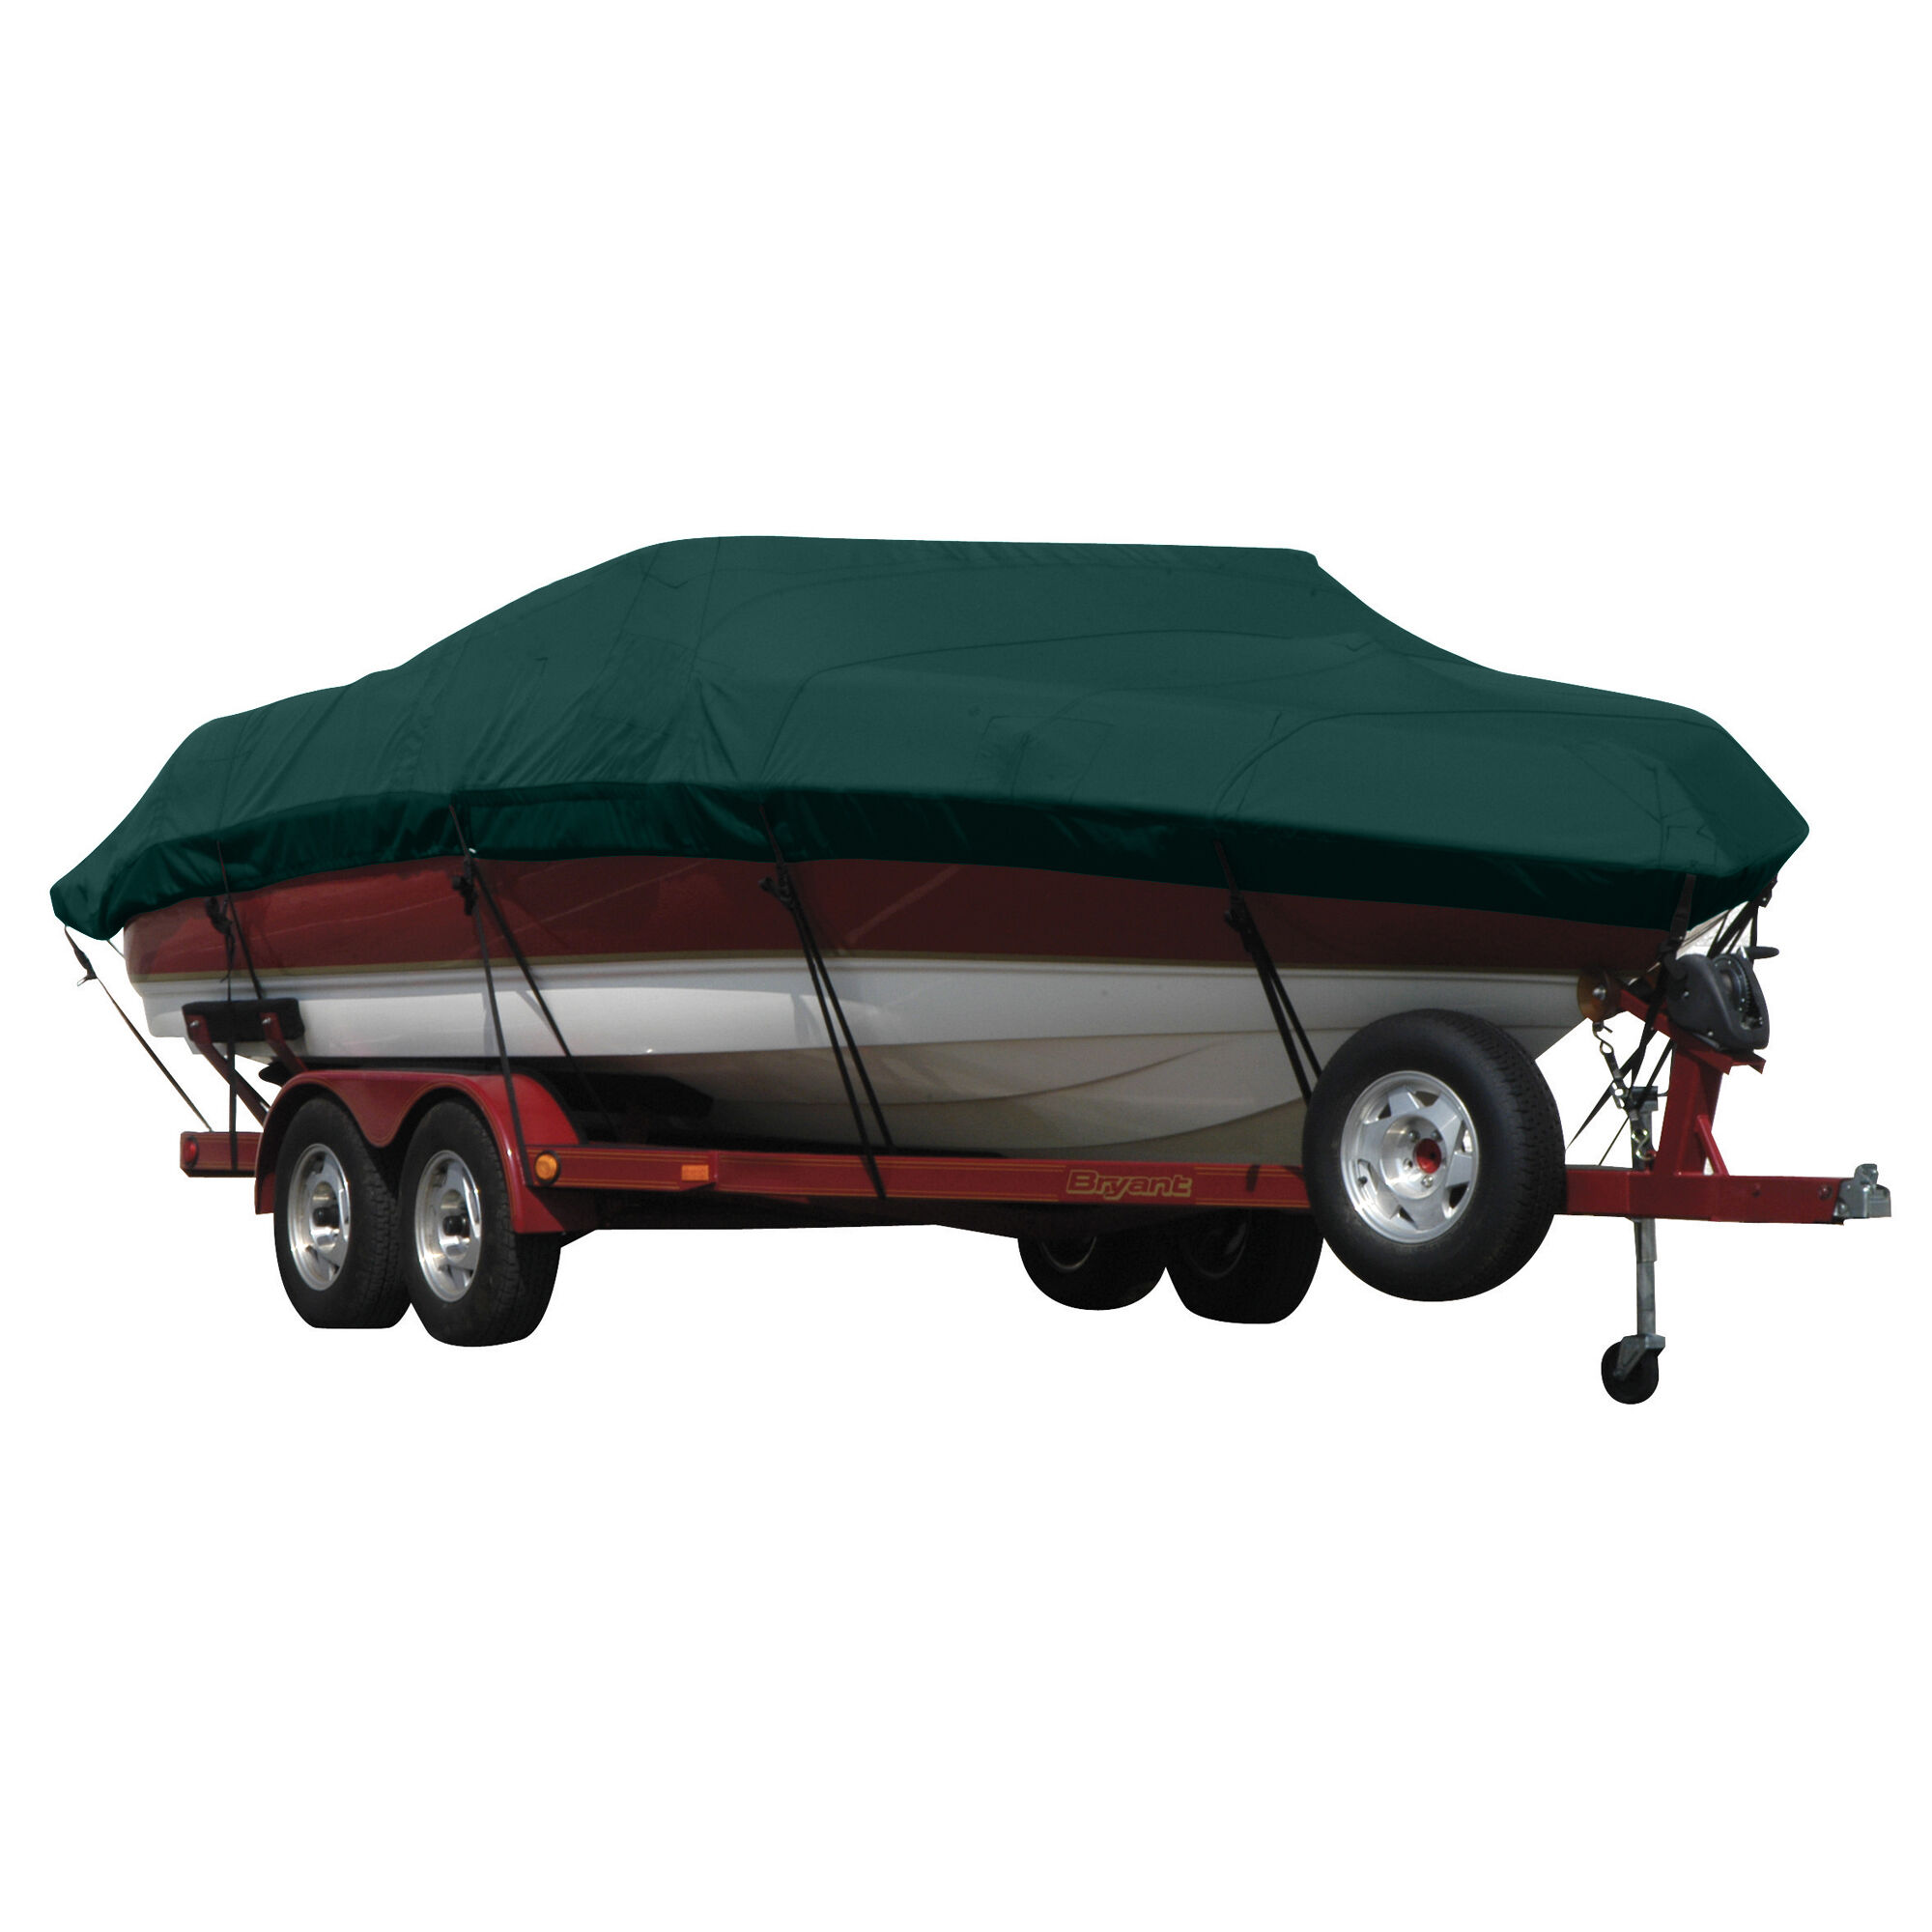 Covermate Exact Fit Sunbrella Boat Cover for Aquapro Inflatables Super Light 901 Super Light 901 O/B. Forest Green